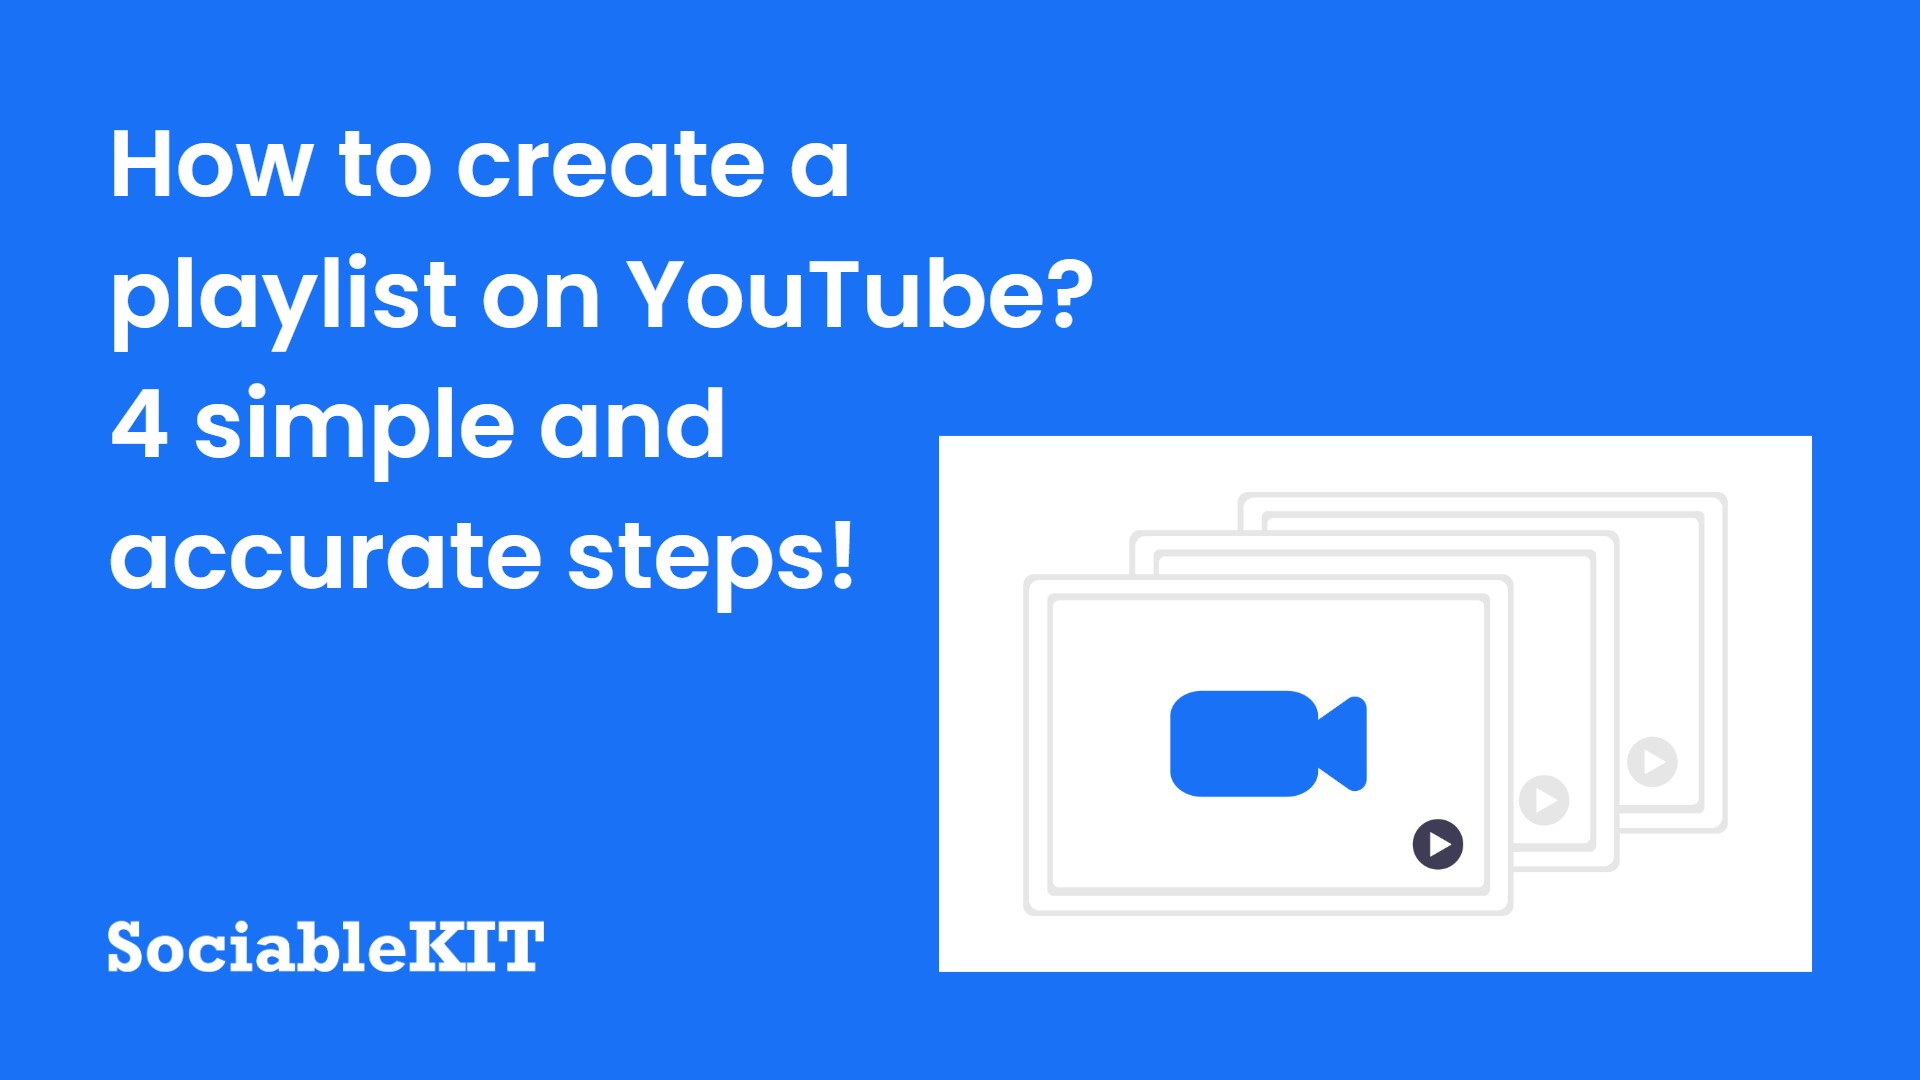 How to create a playlist on YouTube? 4 simple and accurate steps!